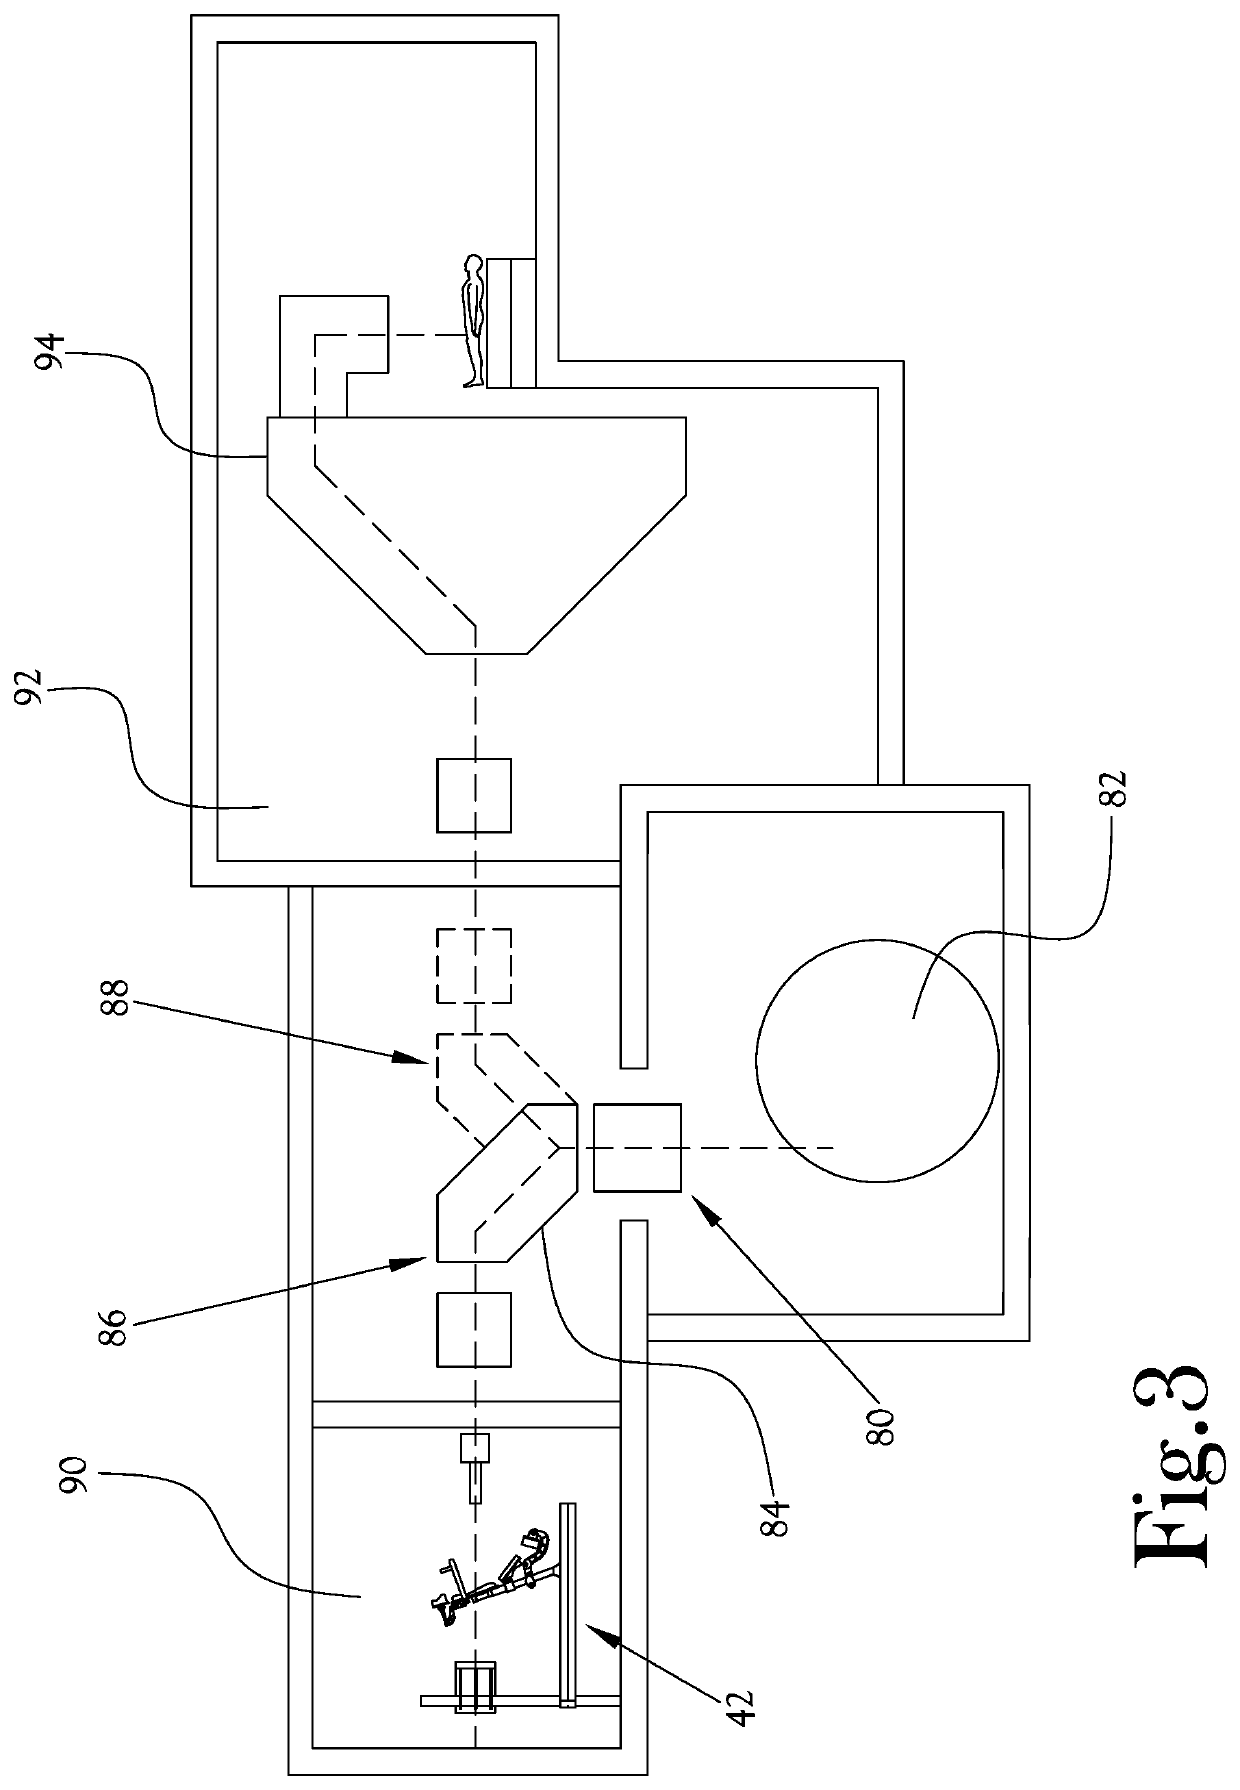 Compact proton therapy systems and methods